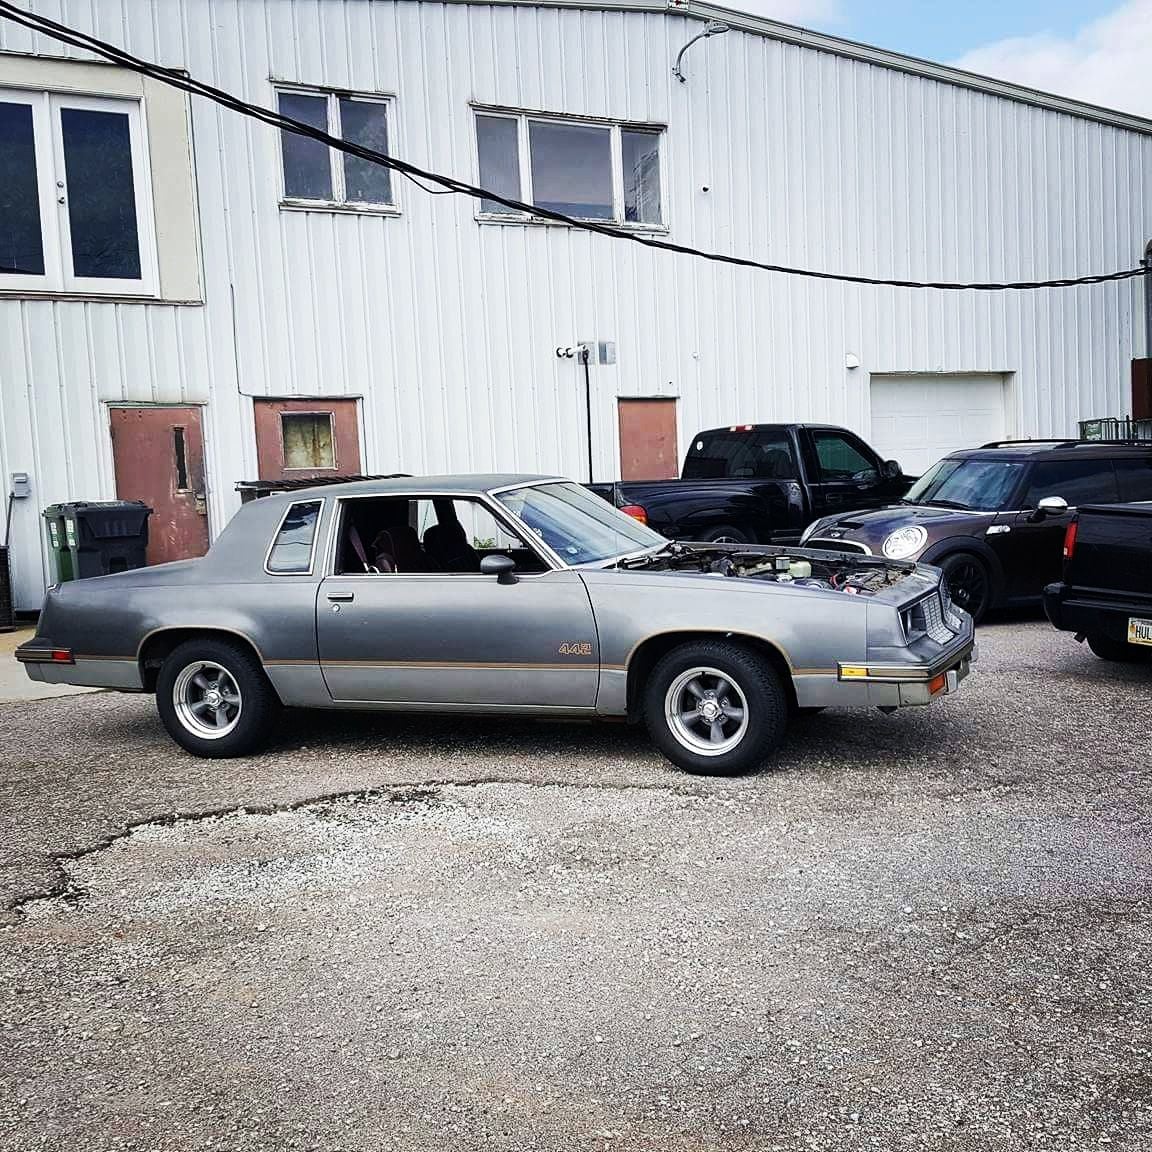 1985 Oldsmobile Cutlass Salon - Delete, keeping it for the time being. - Used - VIN 1fapb986lawo56bvx - 8 cyl - 2WD - Manual - Coupe - Gray - Lincoln, NE 68503, United States